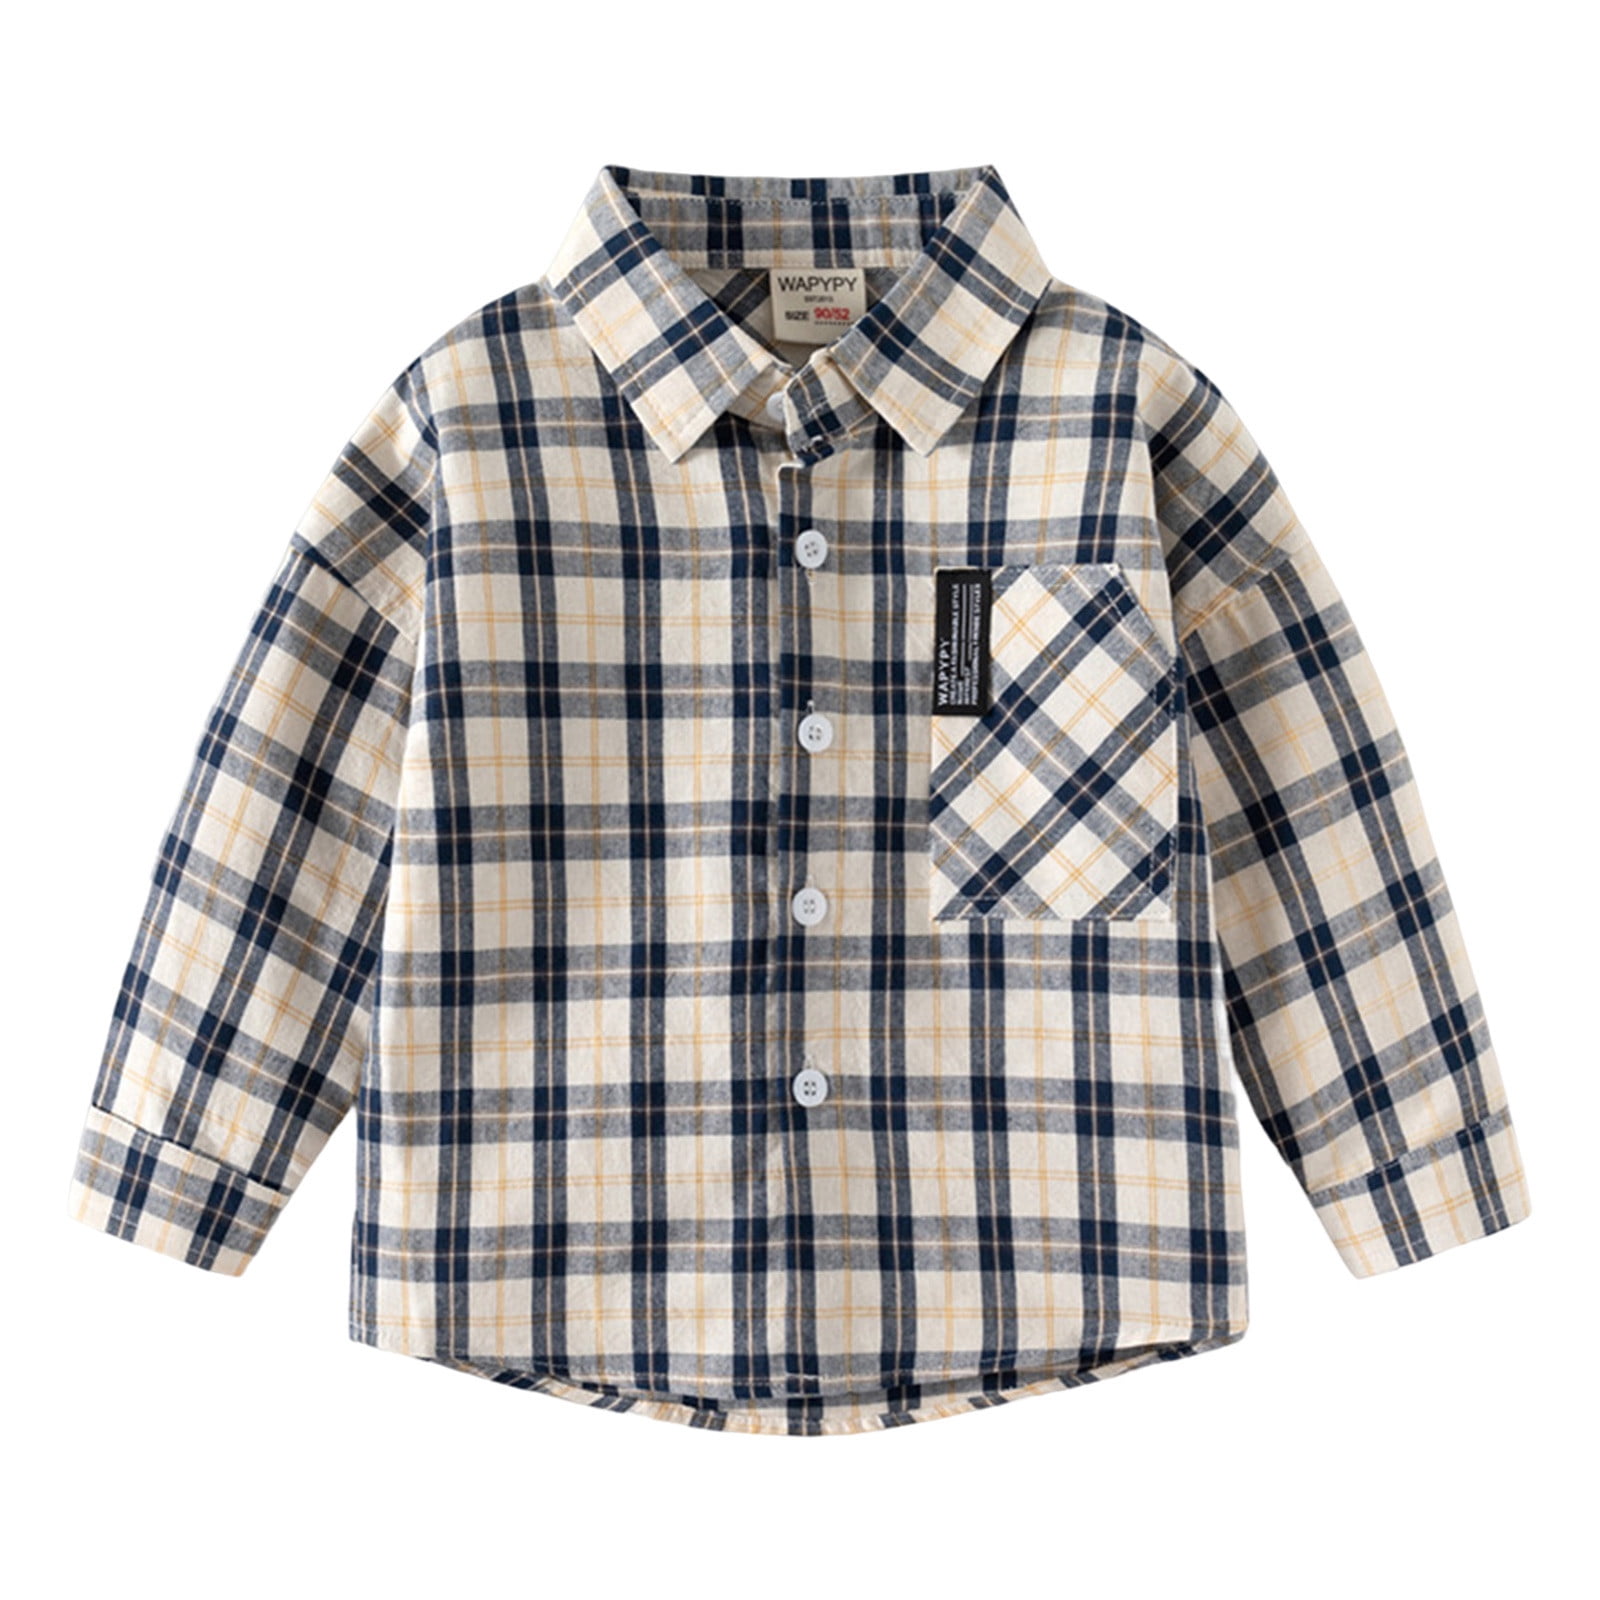 Toddler Boys Girls Tops Flannel Jacket Plaid Long Sleeve Lapel Button ...